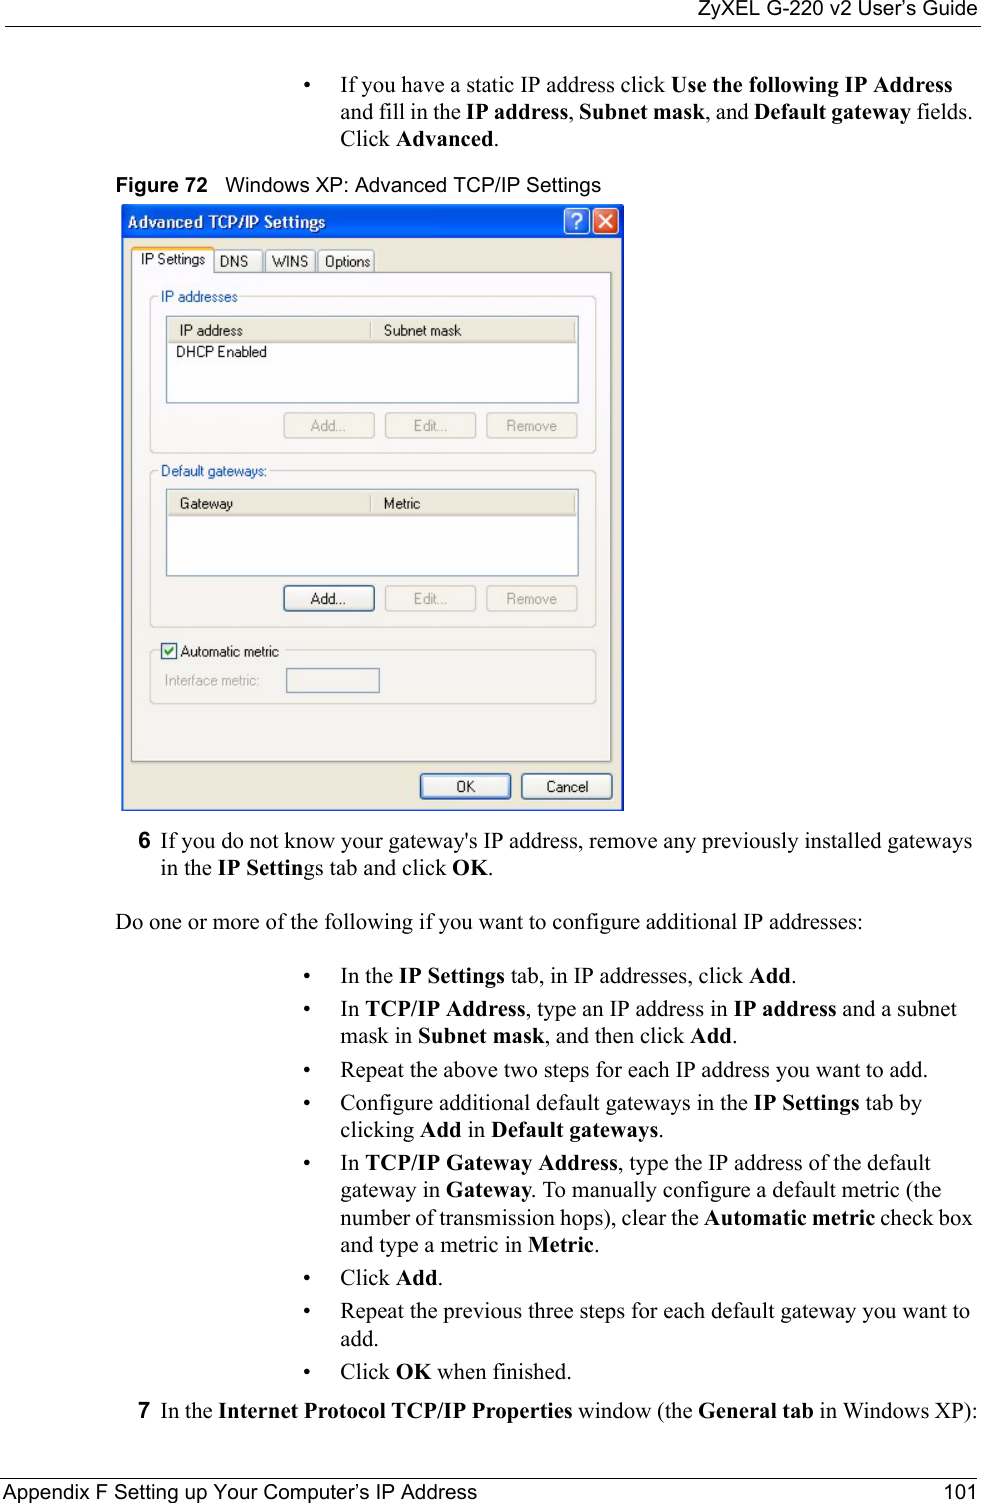 ZyXEL G-220 v2 User’s GuideAppendix F Setting up Your Computer’s IP Address 101• If you have a static IP address click Use the following IP Address and fill in the IP address, Subnet mask, and Default gateway fields. Click Advanced.Figure 72   Windows XP: Advanced TCP/IP Settings6If you do not know your gateway&apos;s IP address, remove any previously installed gateways in the IP Settings tab and click OK.Do one or more of the following if you want to configure additional IP addresses:•In the IP Settings tab, in IP addresses, click Add.•In TCP/IP Address, type an IP address in IP address and a subnet mask in Subnet mask, and then click Add.• Repeat the above two steps for each IP address you want to add.• Configure additional default gateways in the IP Settings tab by clicking Add in Default gateways.•In TCP/IP Gateway Address, type the IP address of the default gateway in Gateway. To manually configure a default metric (the number of transmission hops), clear the Automatic metric check box and type a metric in Metric.• Click Add. • Repeat the previous three steps for each default gateway you want to add.• Click OK when finished.7In the Internet Protocol TCP/IP Properties window (the General tab in Windows XP):